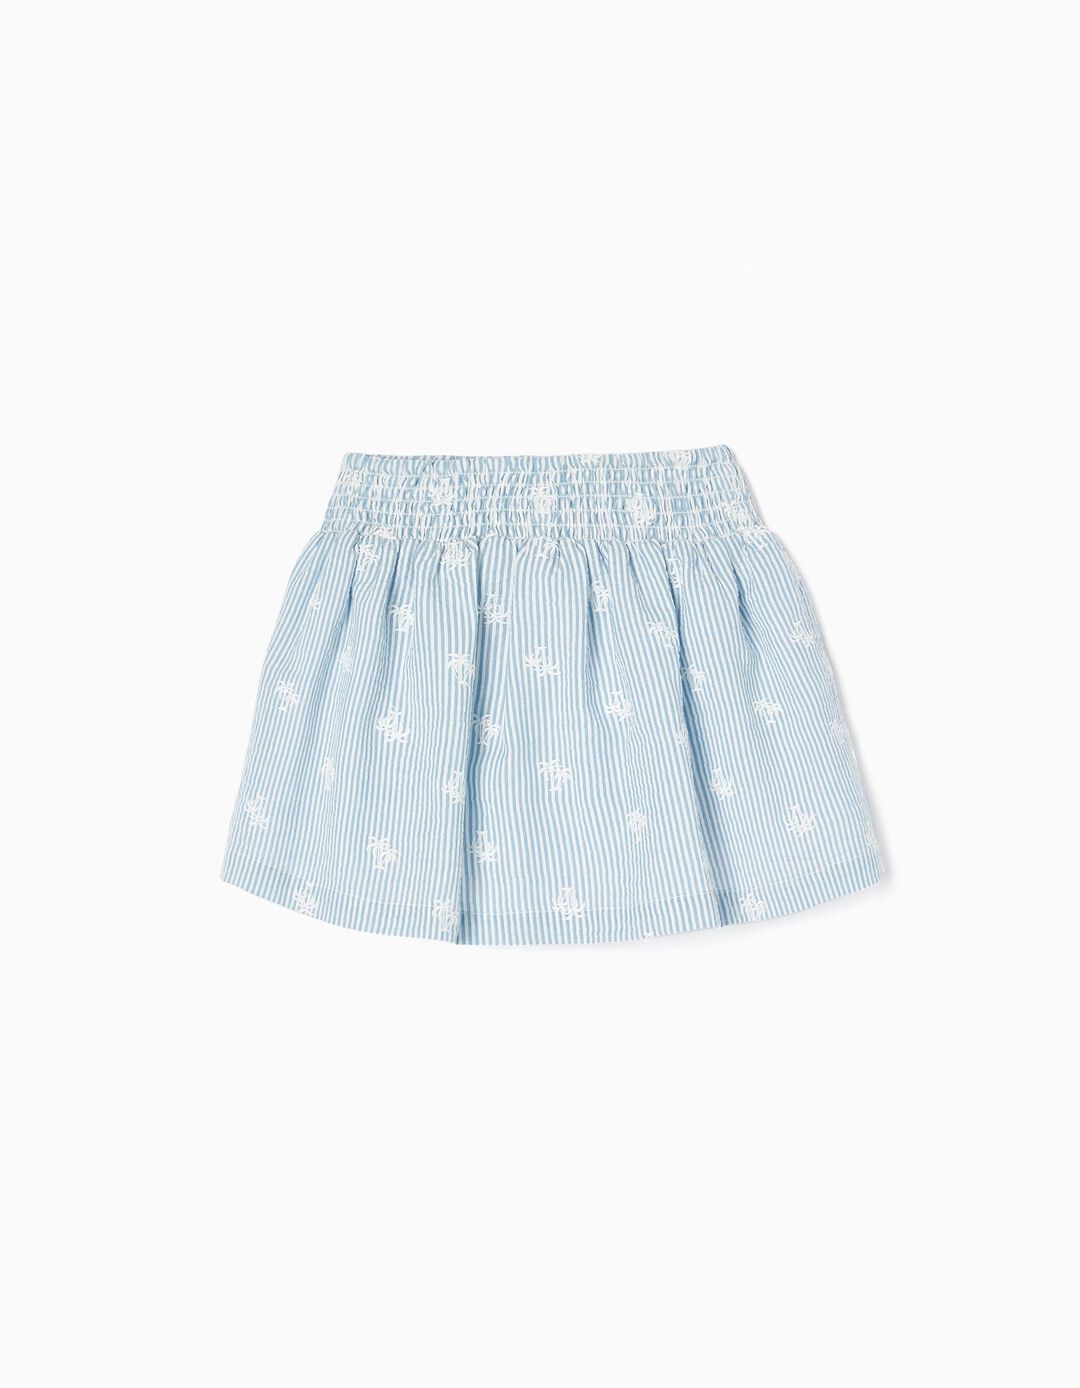 Striped Cotton Skirt for Girls 'You&Me', Blue/White